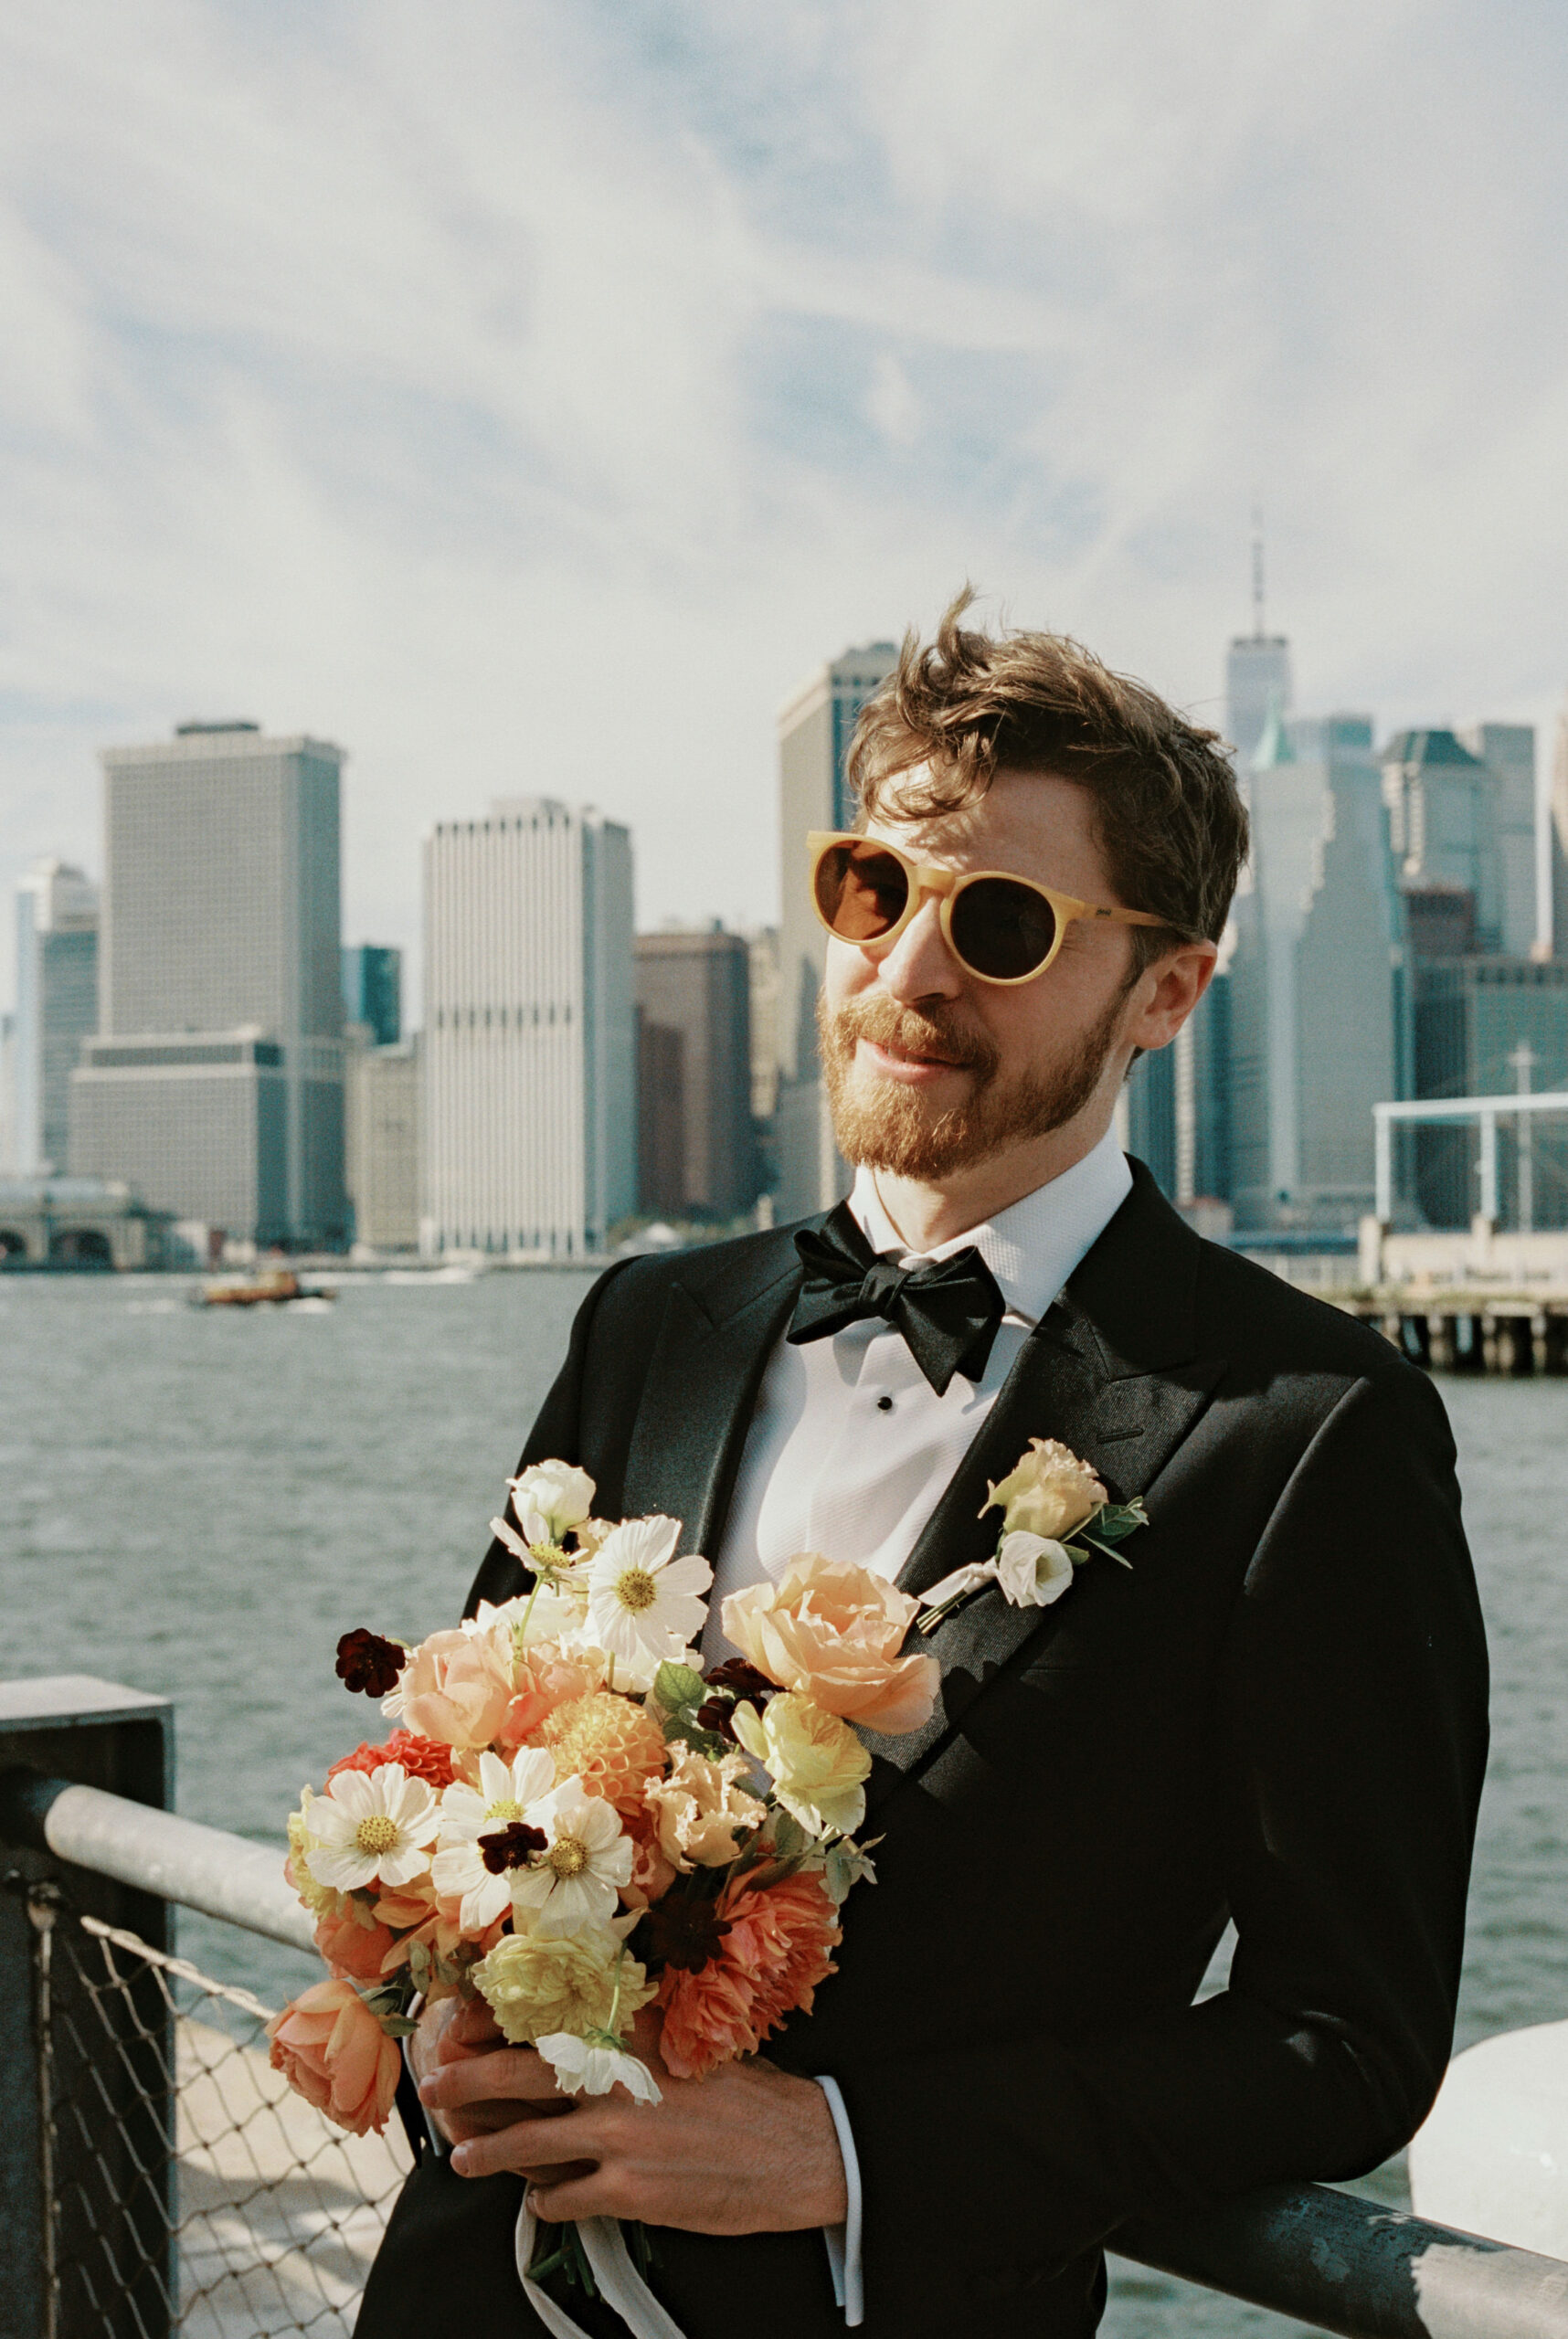 Editorial documentary image of the groom with NYC buildings in the background. Image by Jenny Fu Studio